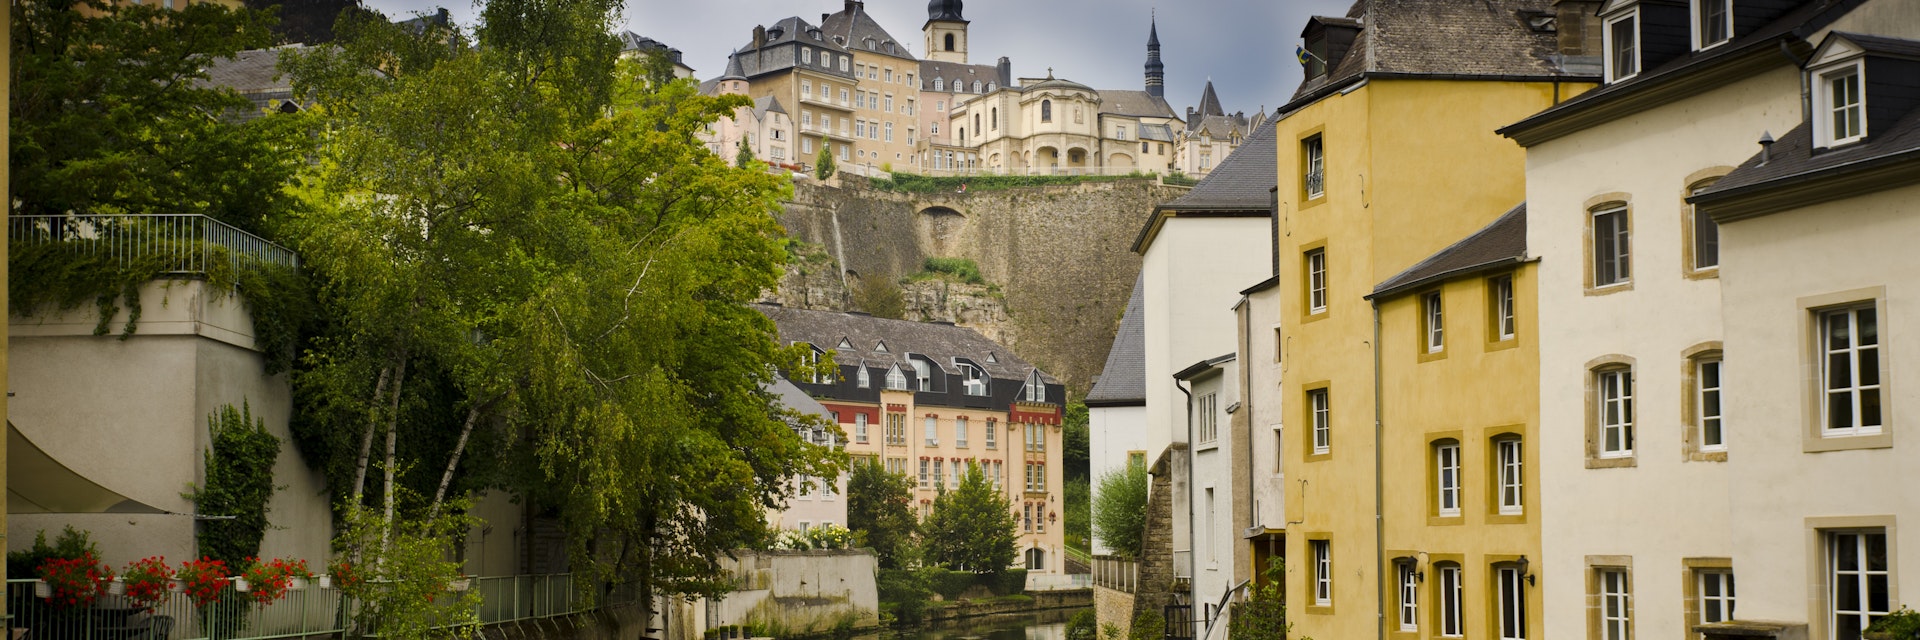 The last remaining Grand Duchy in the worldThe last remaining Grand Duchy in the world, Luxembourg both the name of the Capital City and this tiny country, bordered by Belgium, France and Germany. The country has the highest GPD per capita of any country in the world and retains it's beauty in it's UNESCO World Heritage listed old quarters.